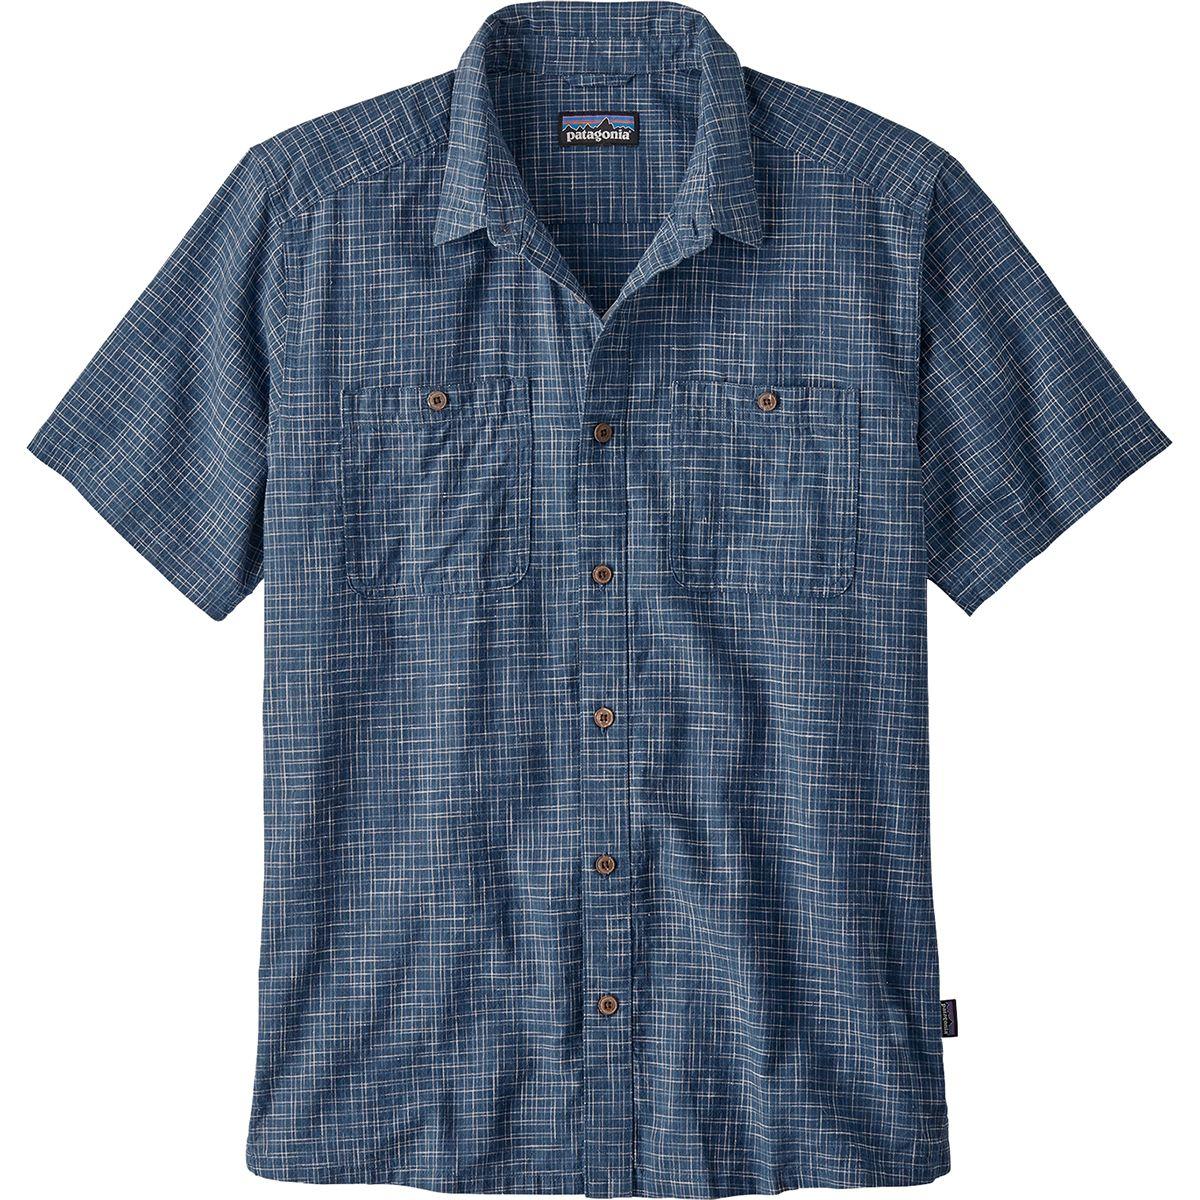 Patagonia Cotton Back Step Shirt in Blue for Men - Lyst